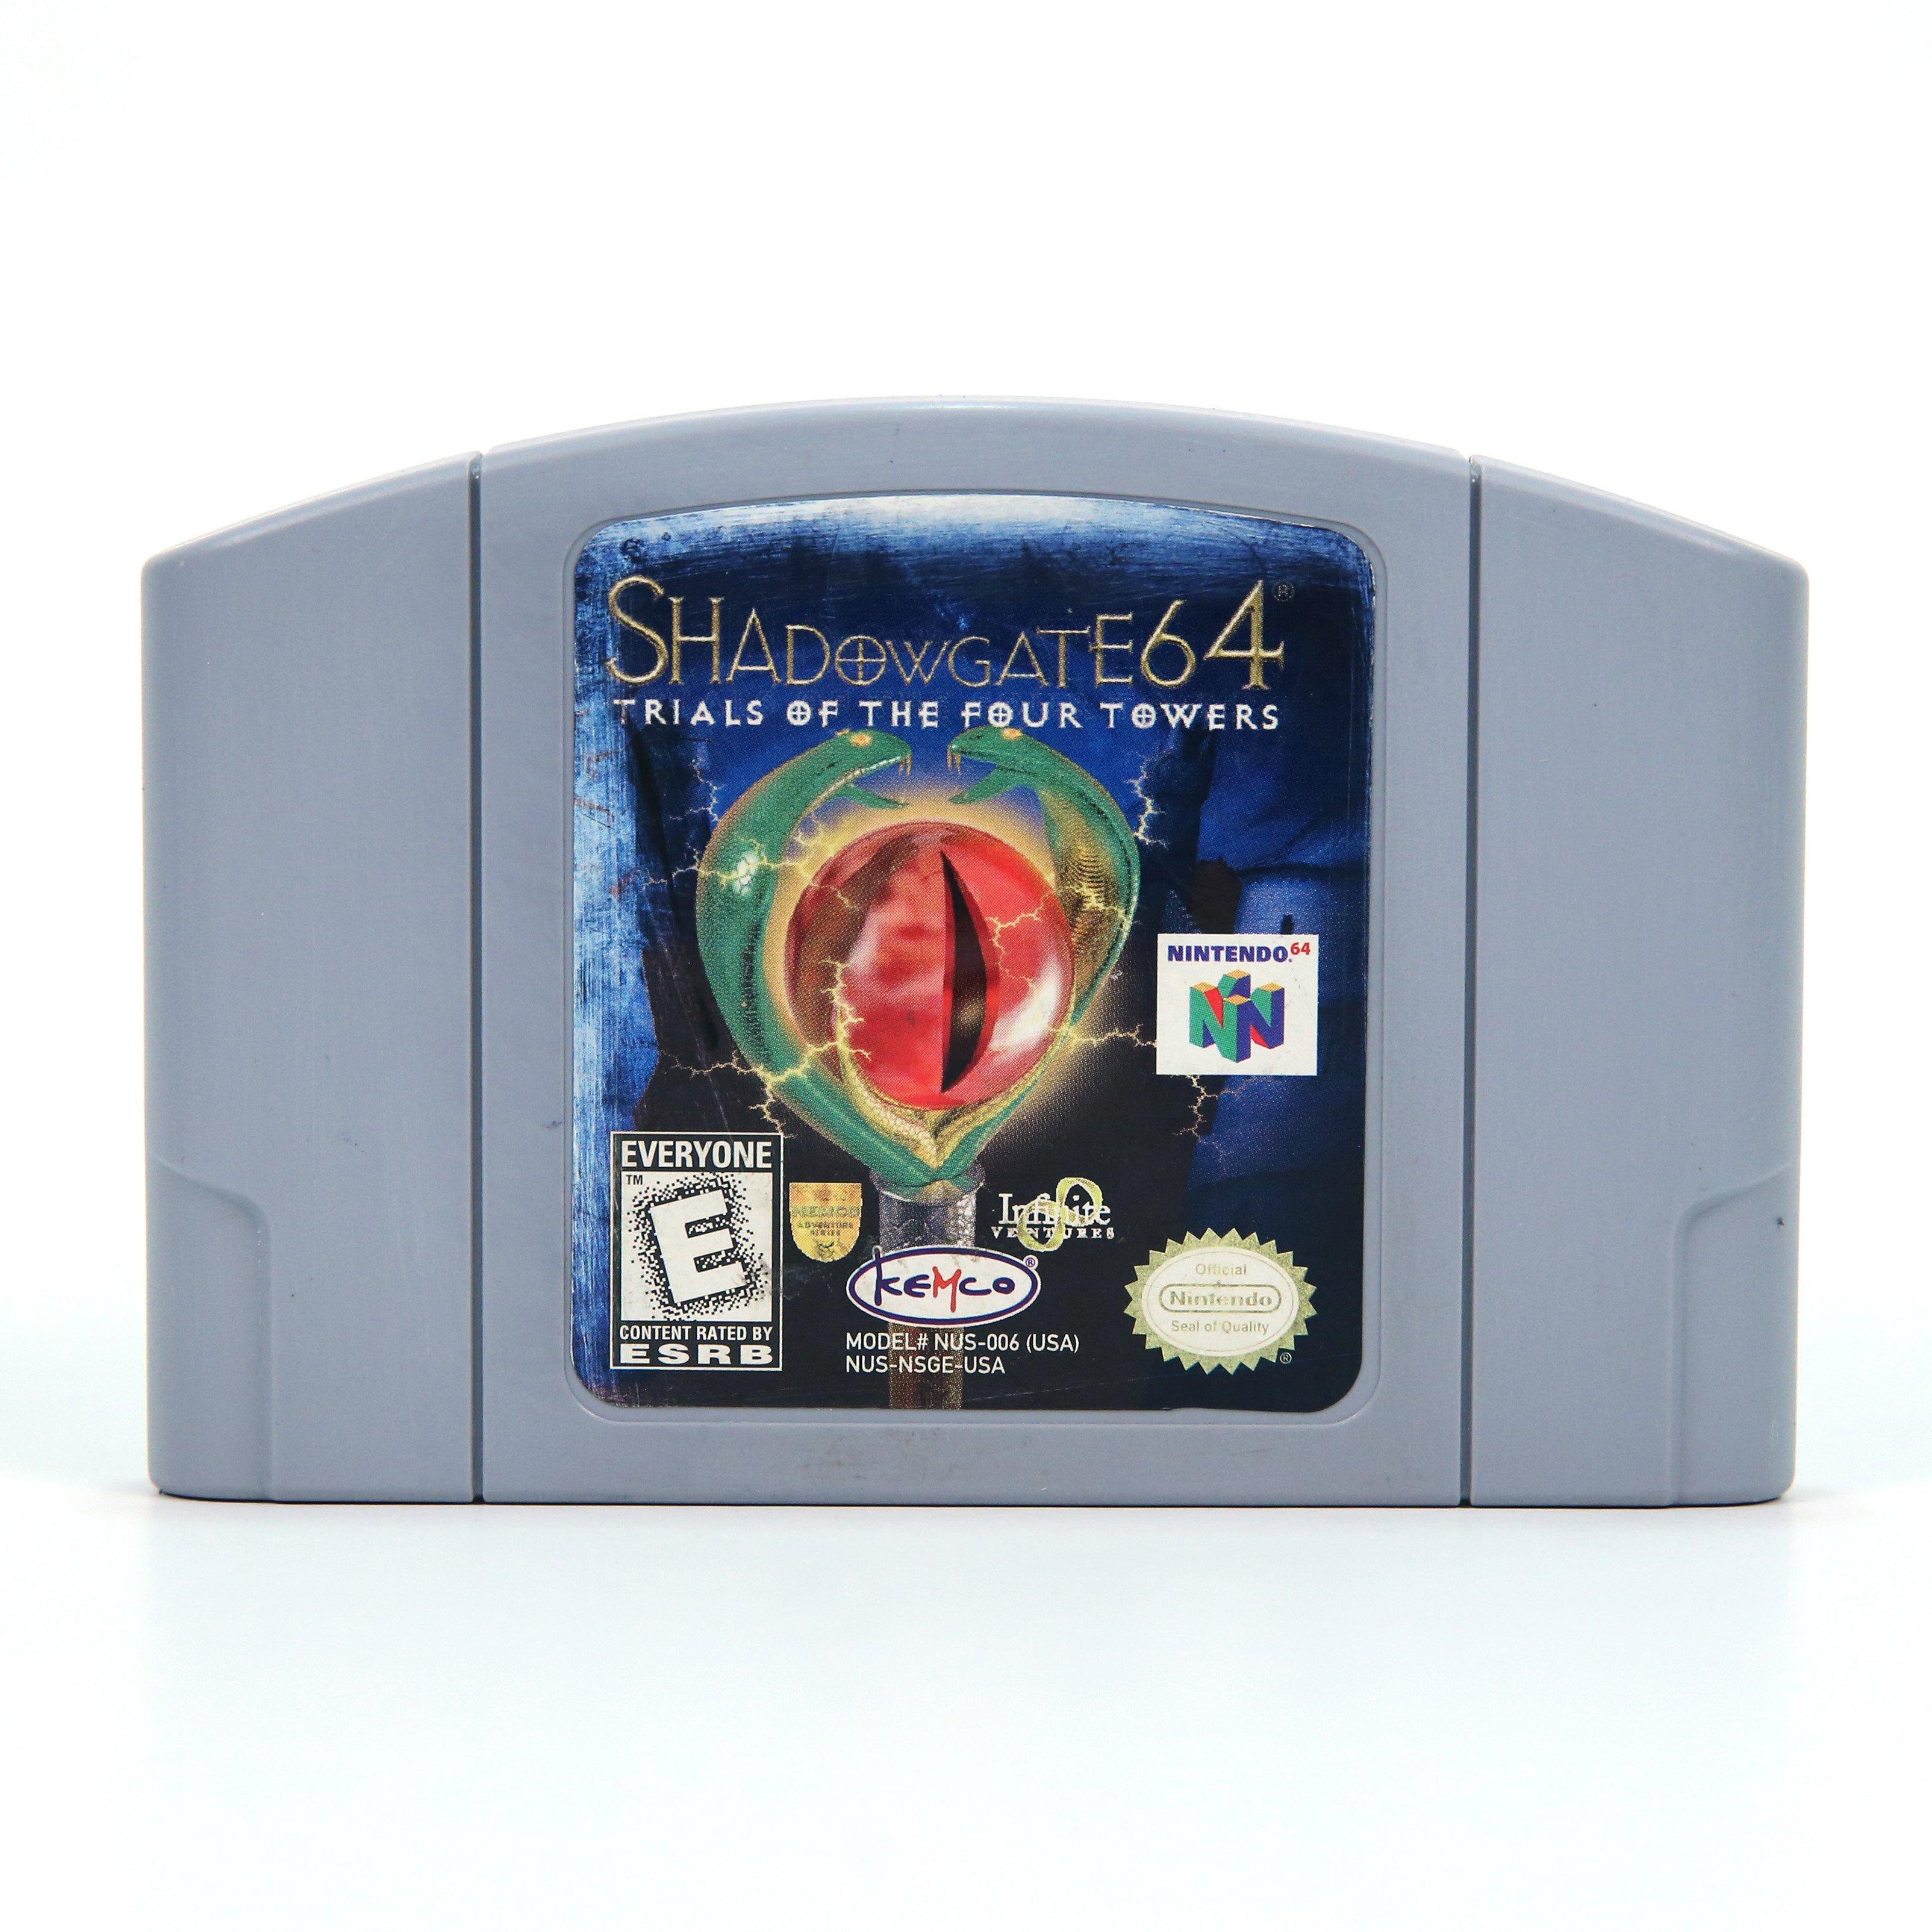 Shadowgate 64: Trials of the Four Towers - Nintendo 64